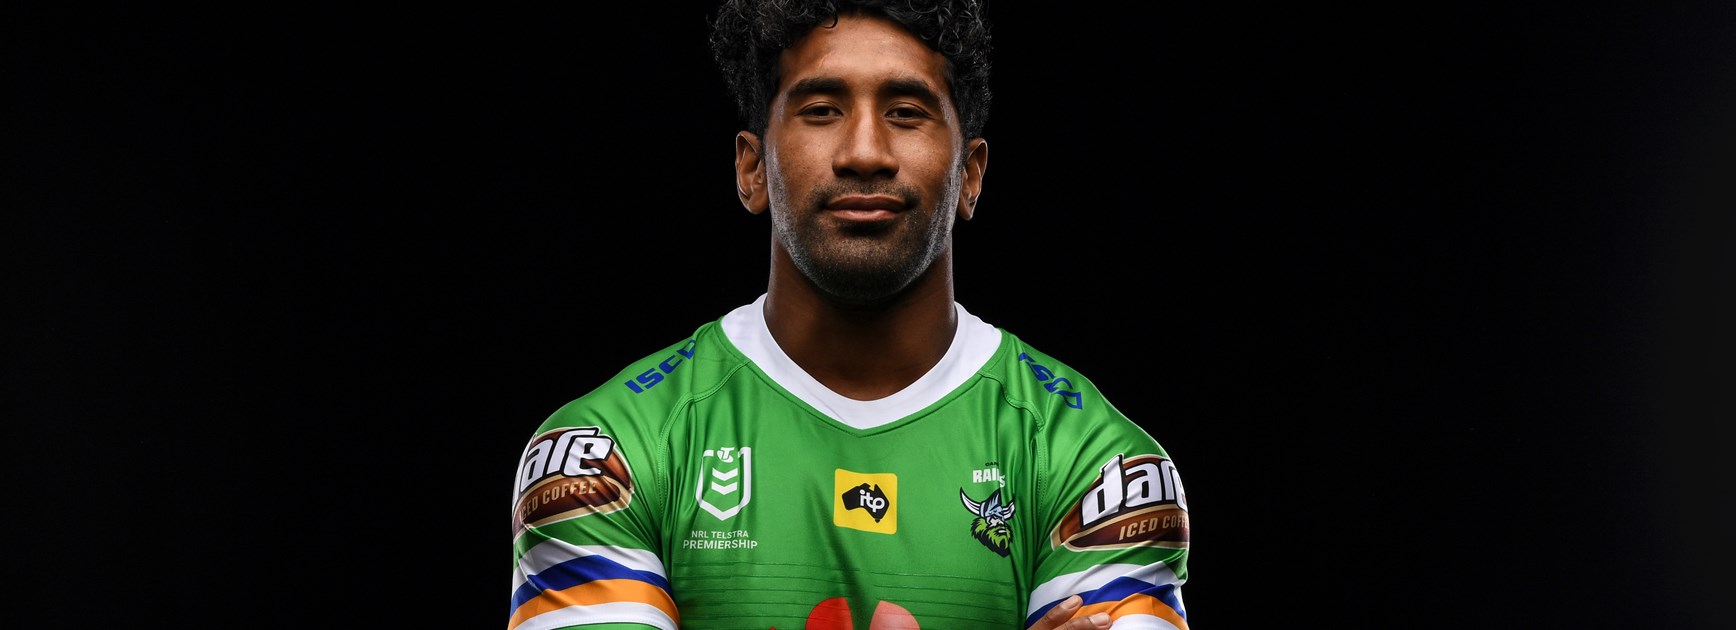 2021 Signings Tracker: Bullemor extends Broncos stay